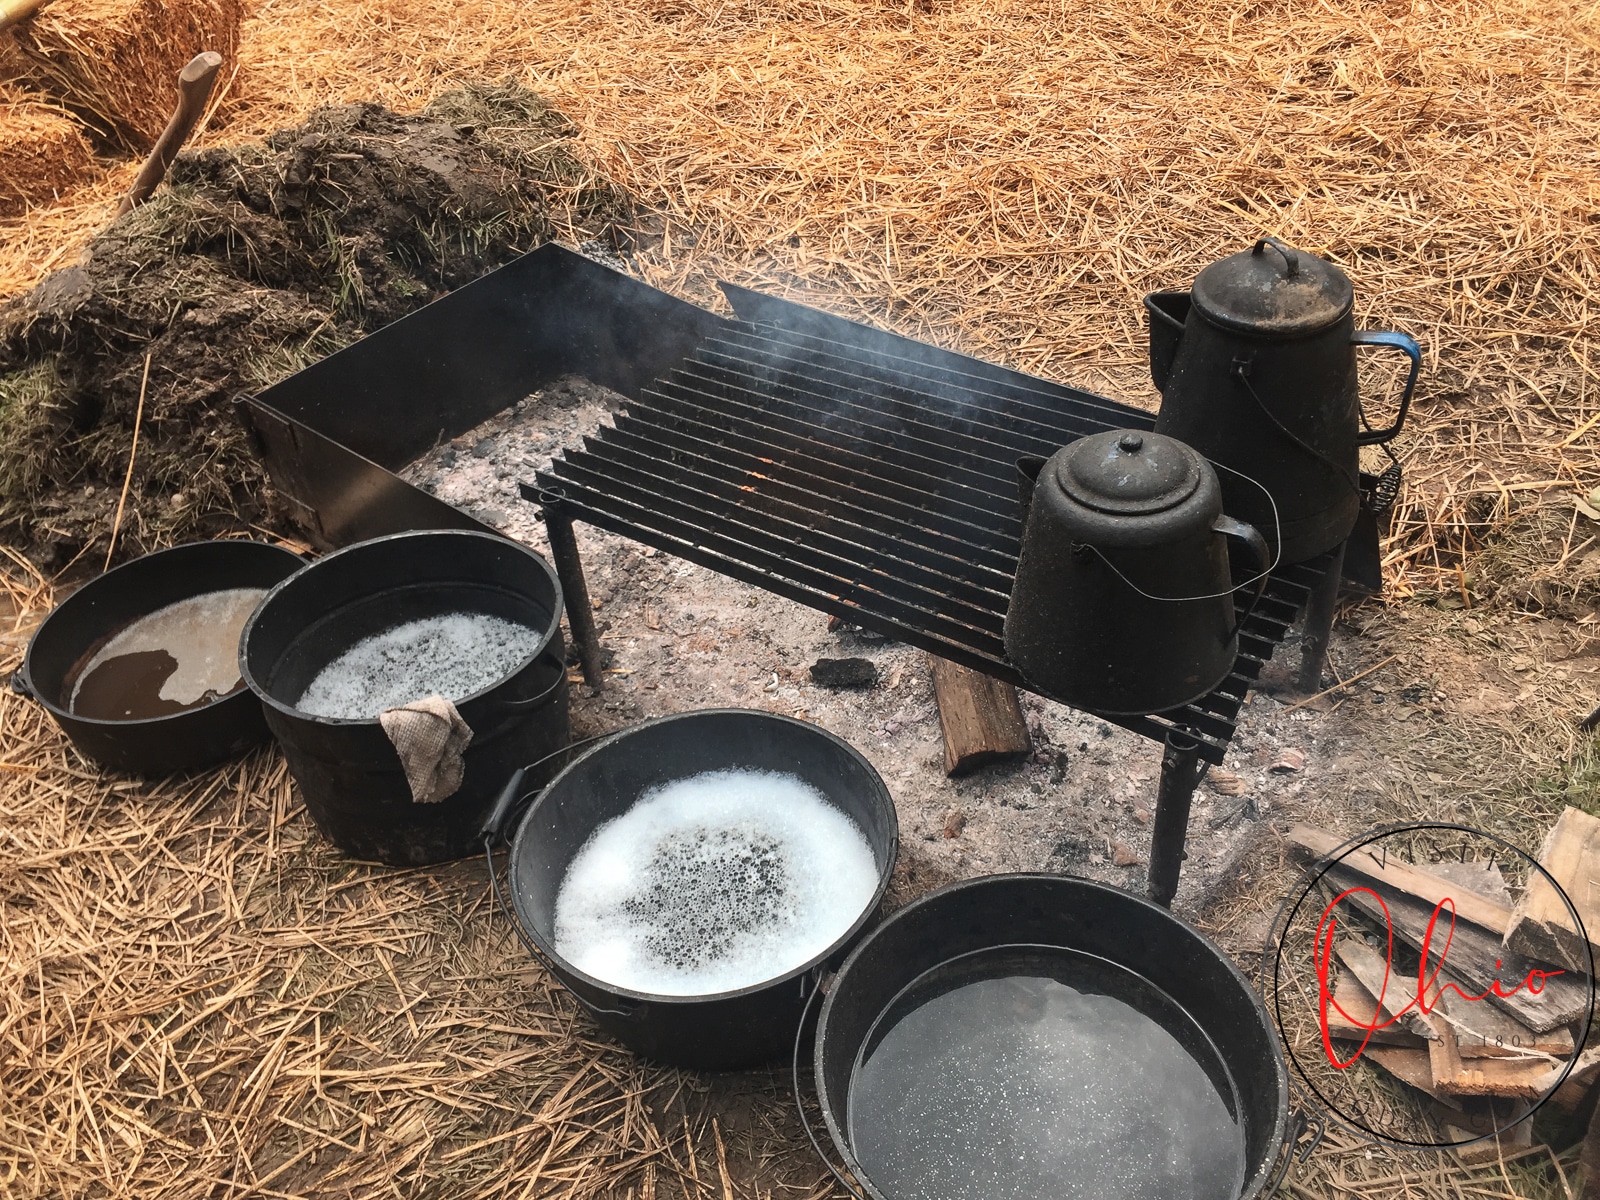 old firepit stove with cast iron pans filled with liquid at ohio village Photo credit: Cindy Gordon of VisitOhioToday.com